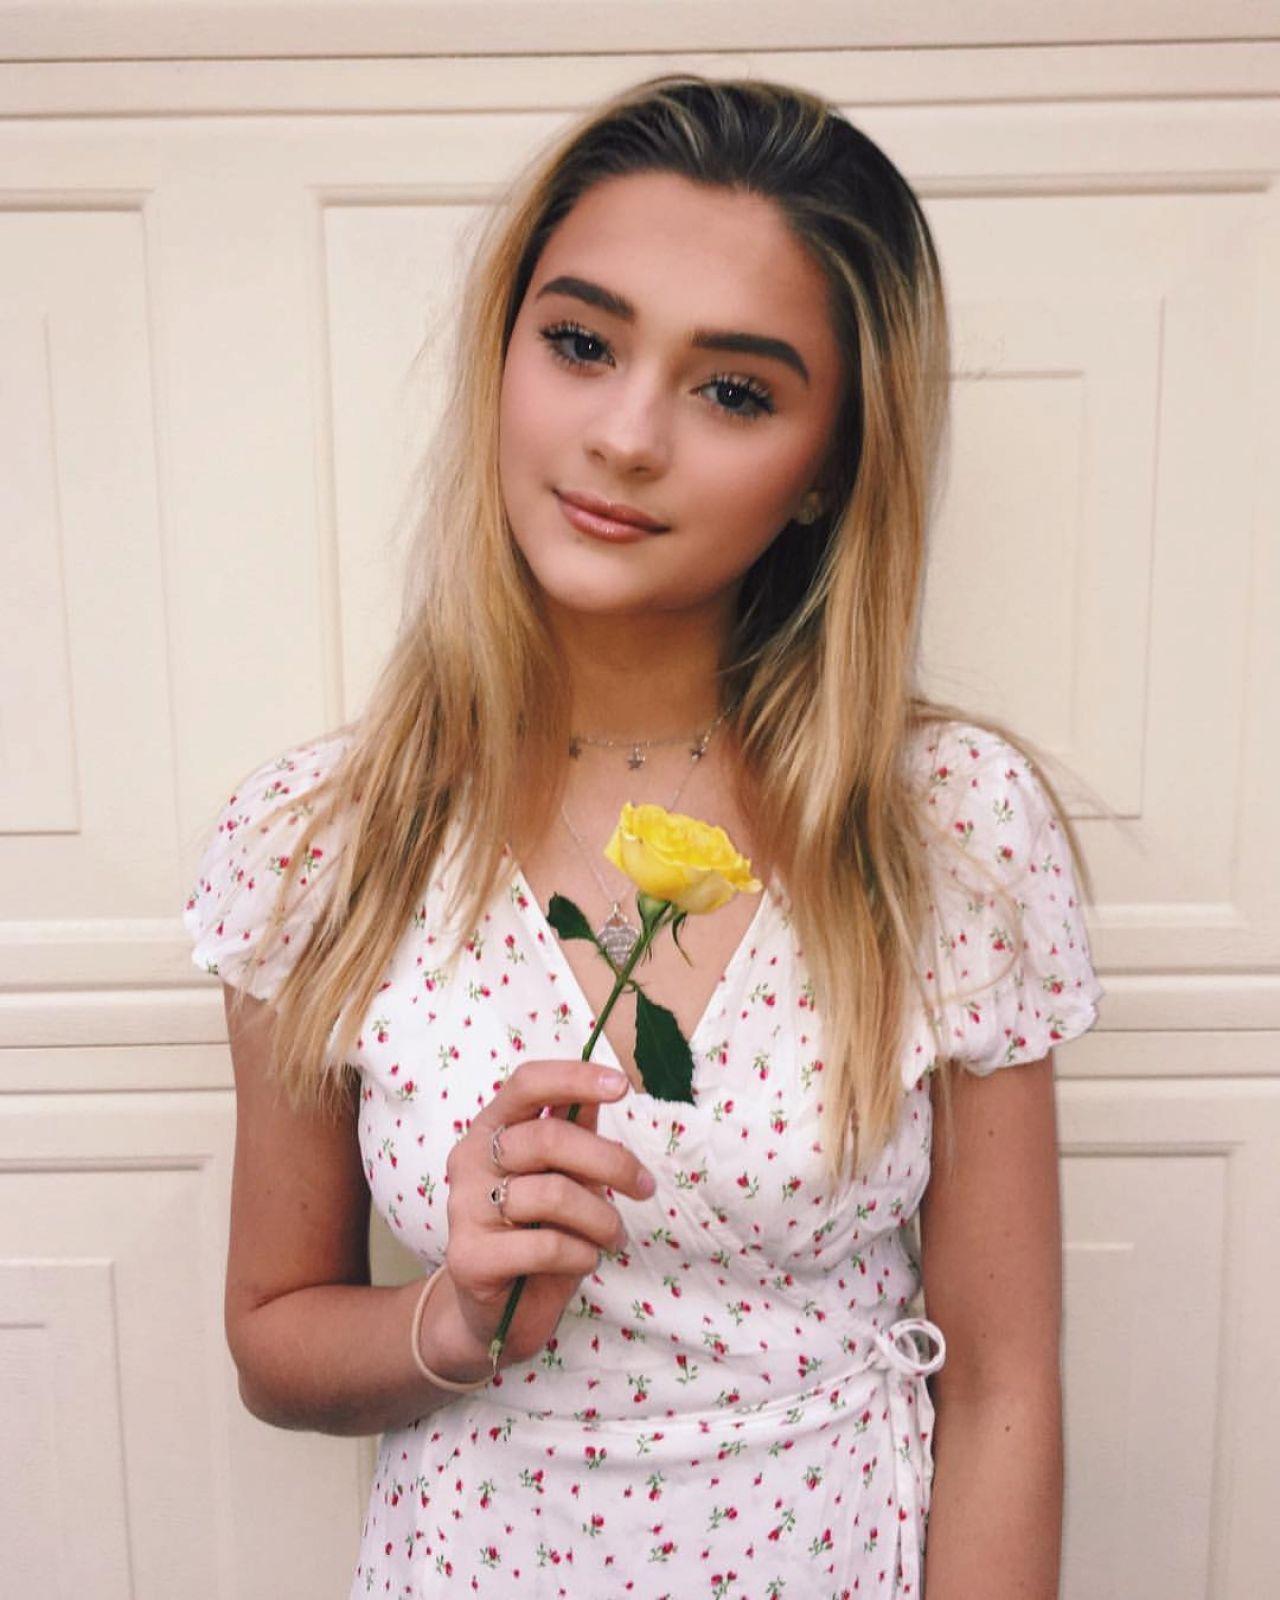 Pictures of Lizzy Greene Facebook.